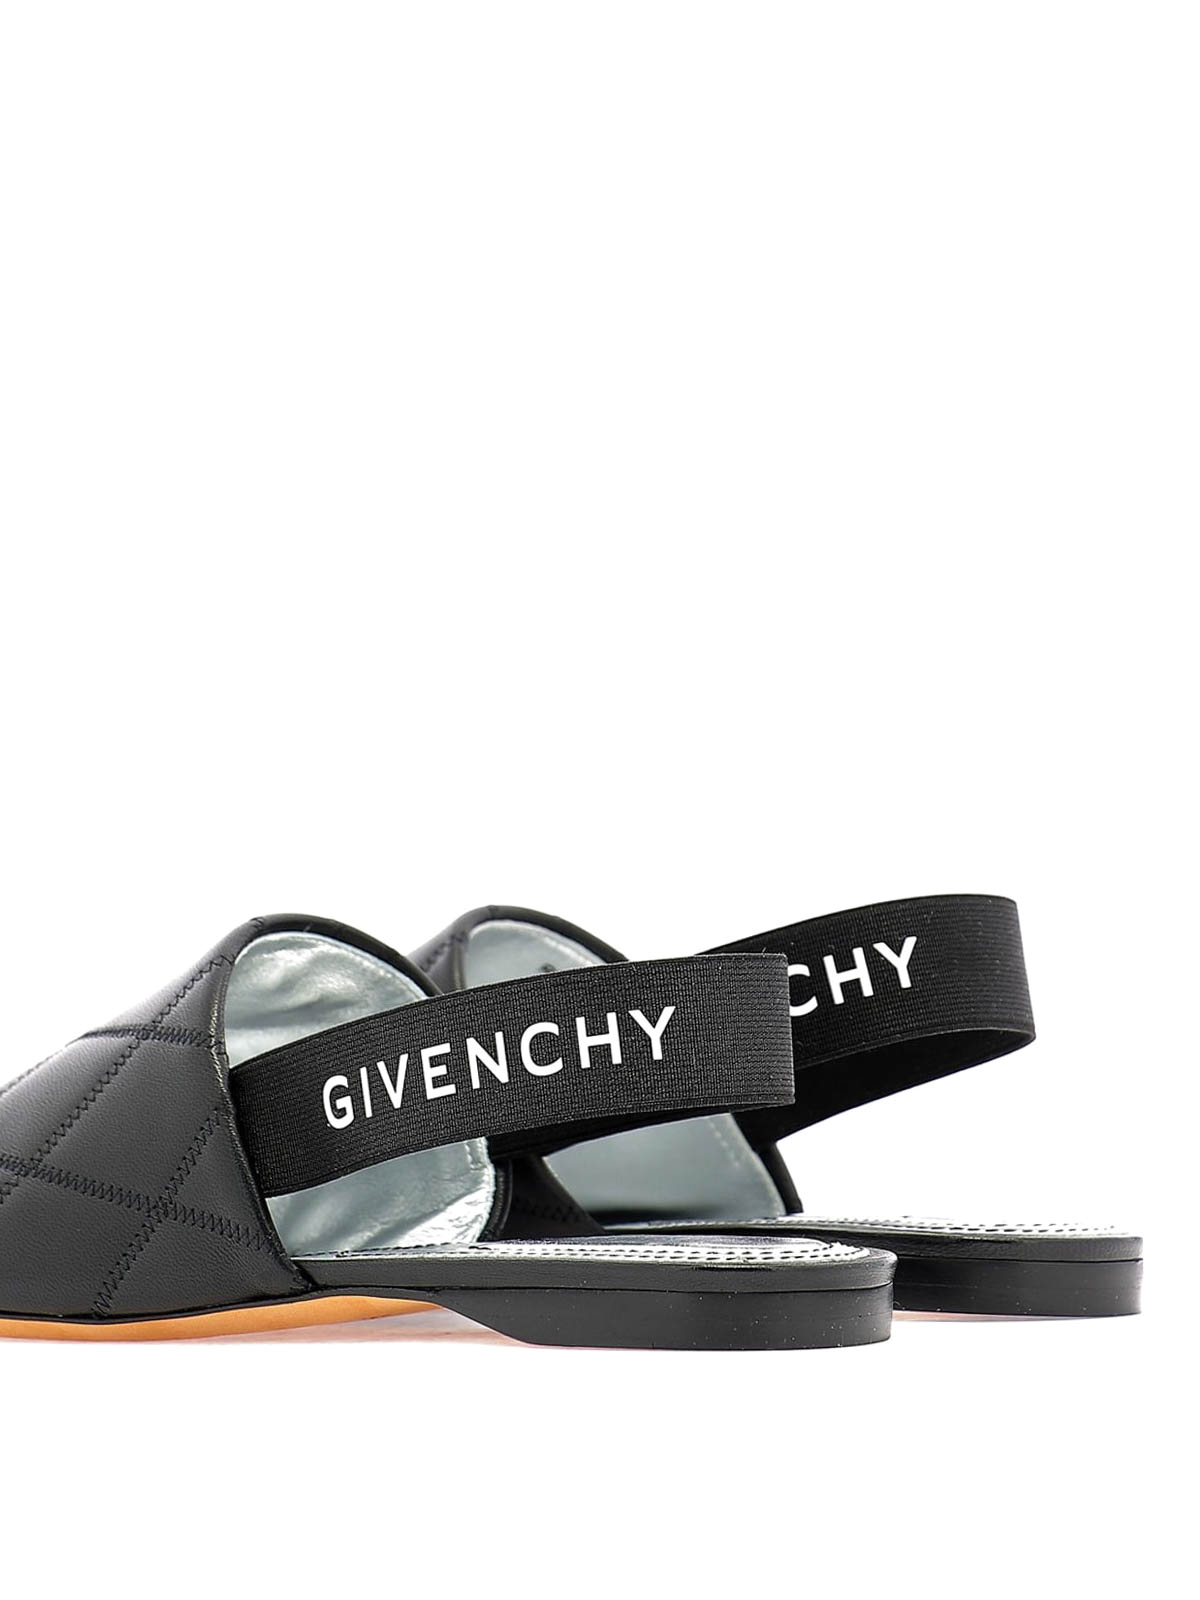 Mules shoes Givenchy - Rivington mules with logo ankle strap 